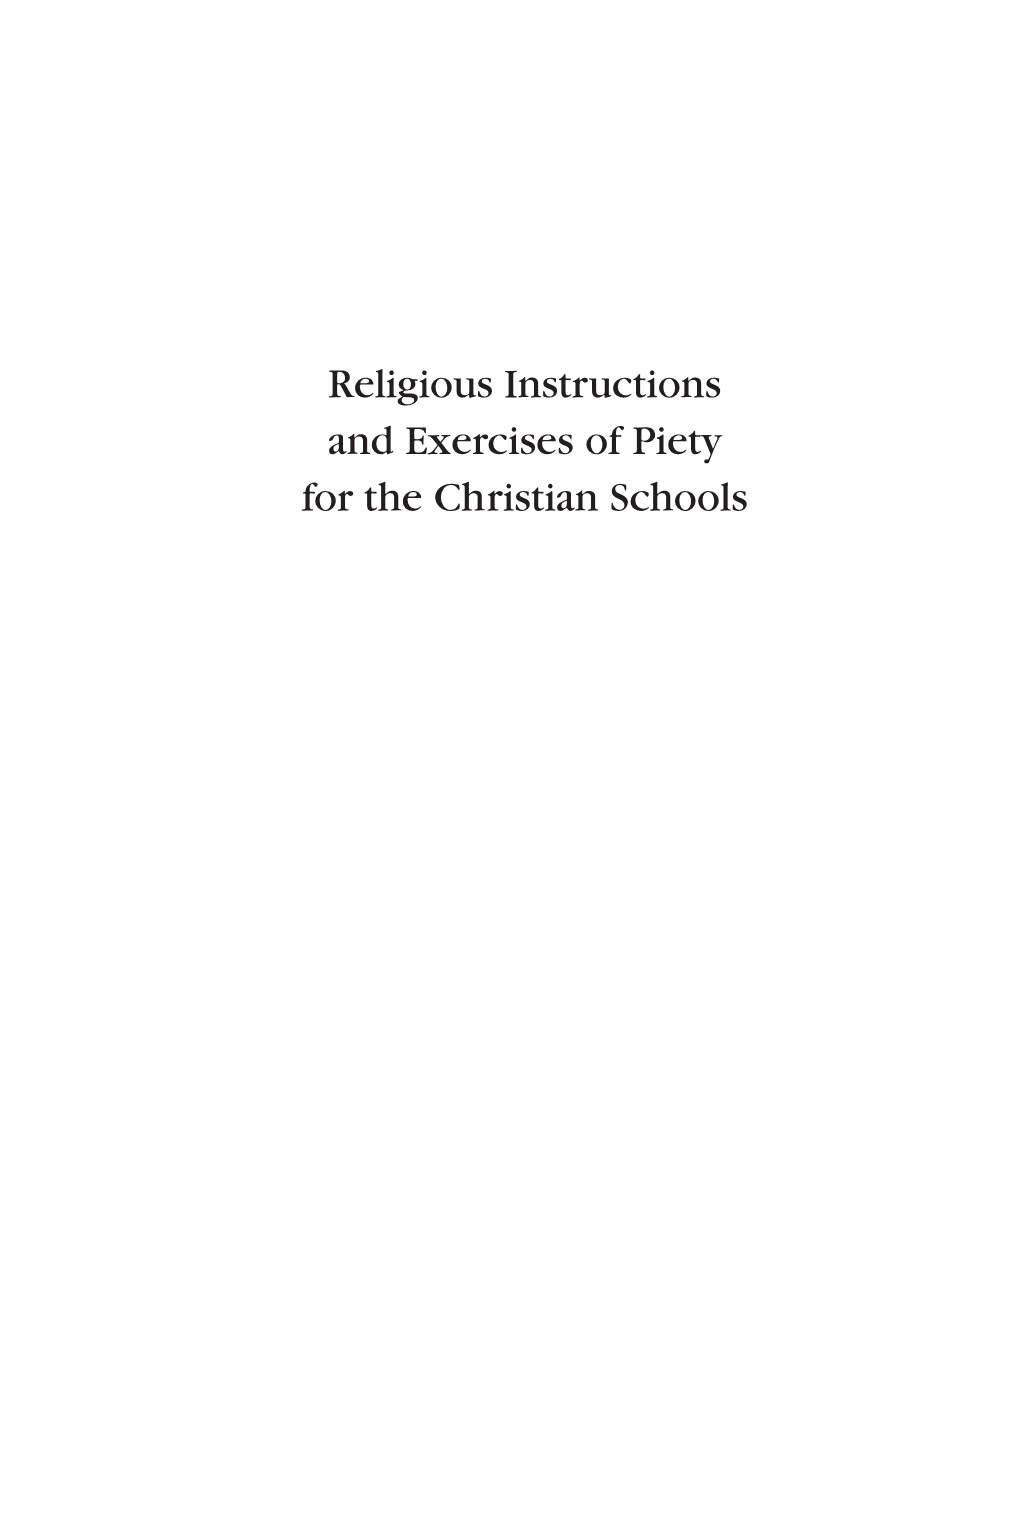 Religious Instructions and Exercises of Piety for the Christian Schools